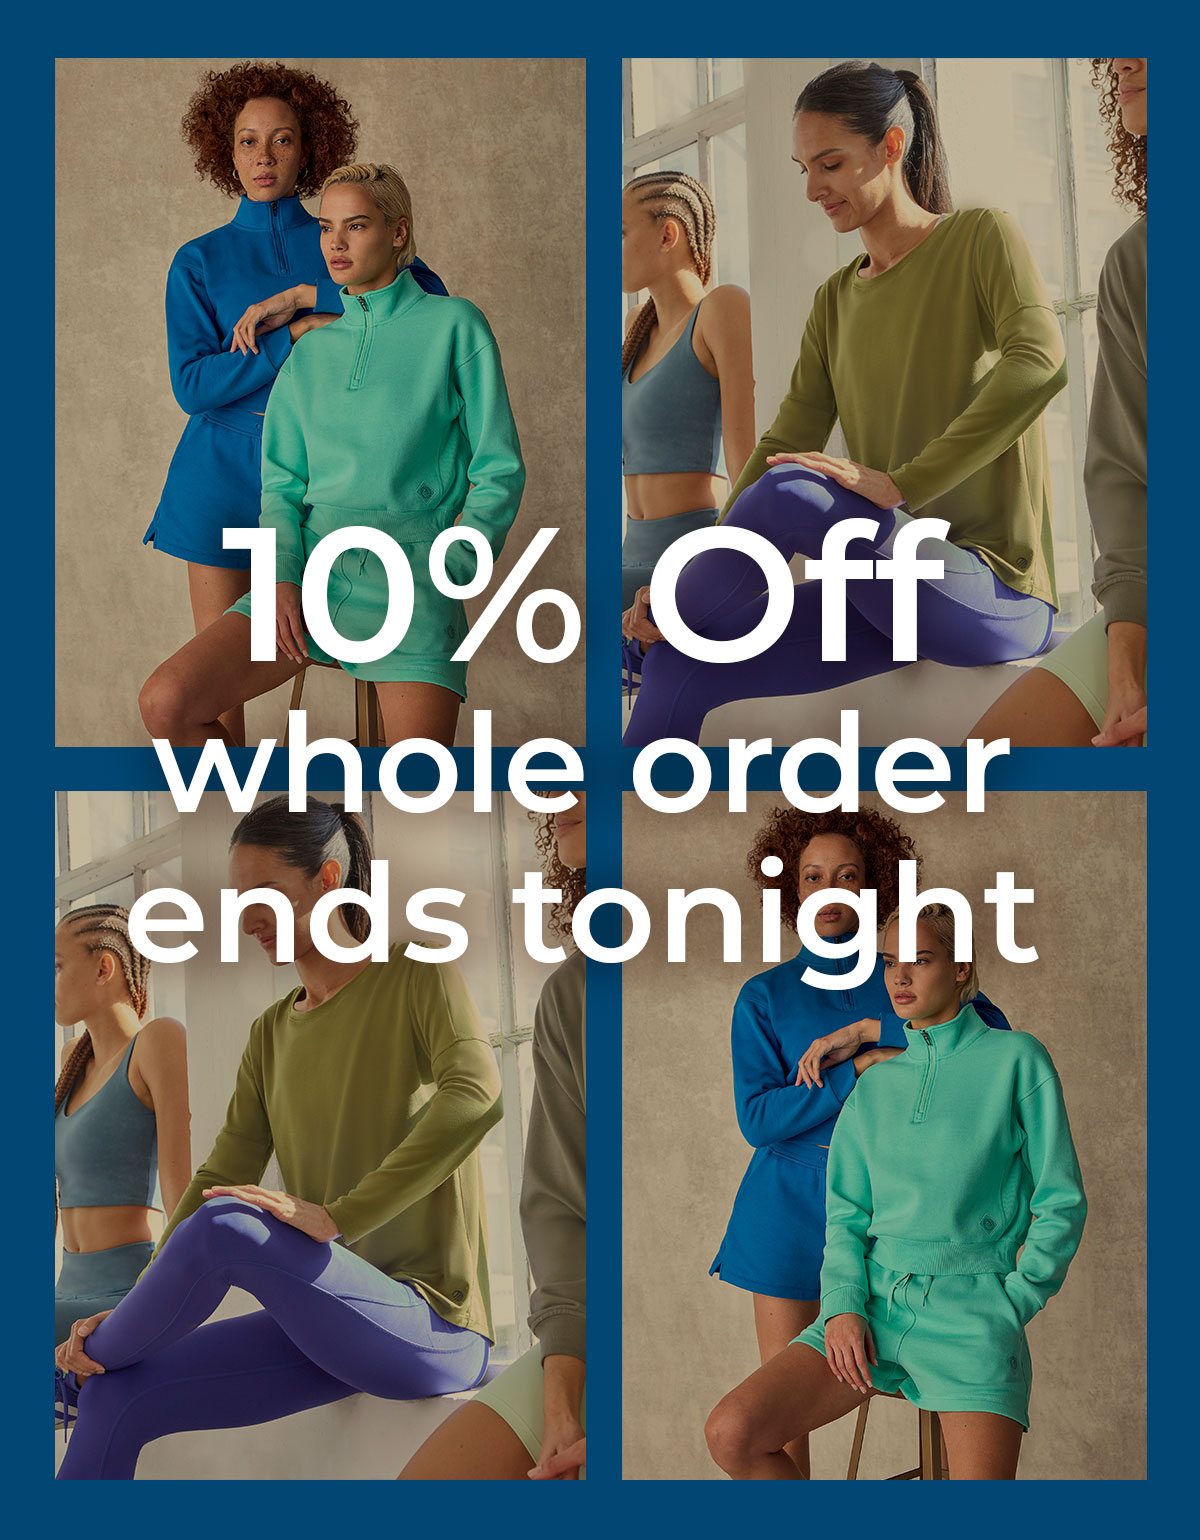 10% Off whole order end tonight